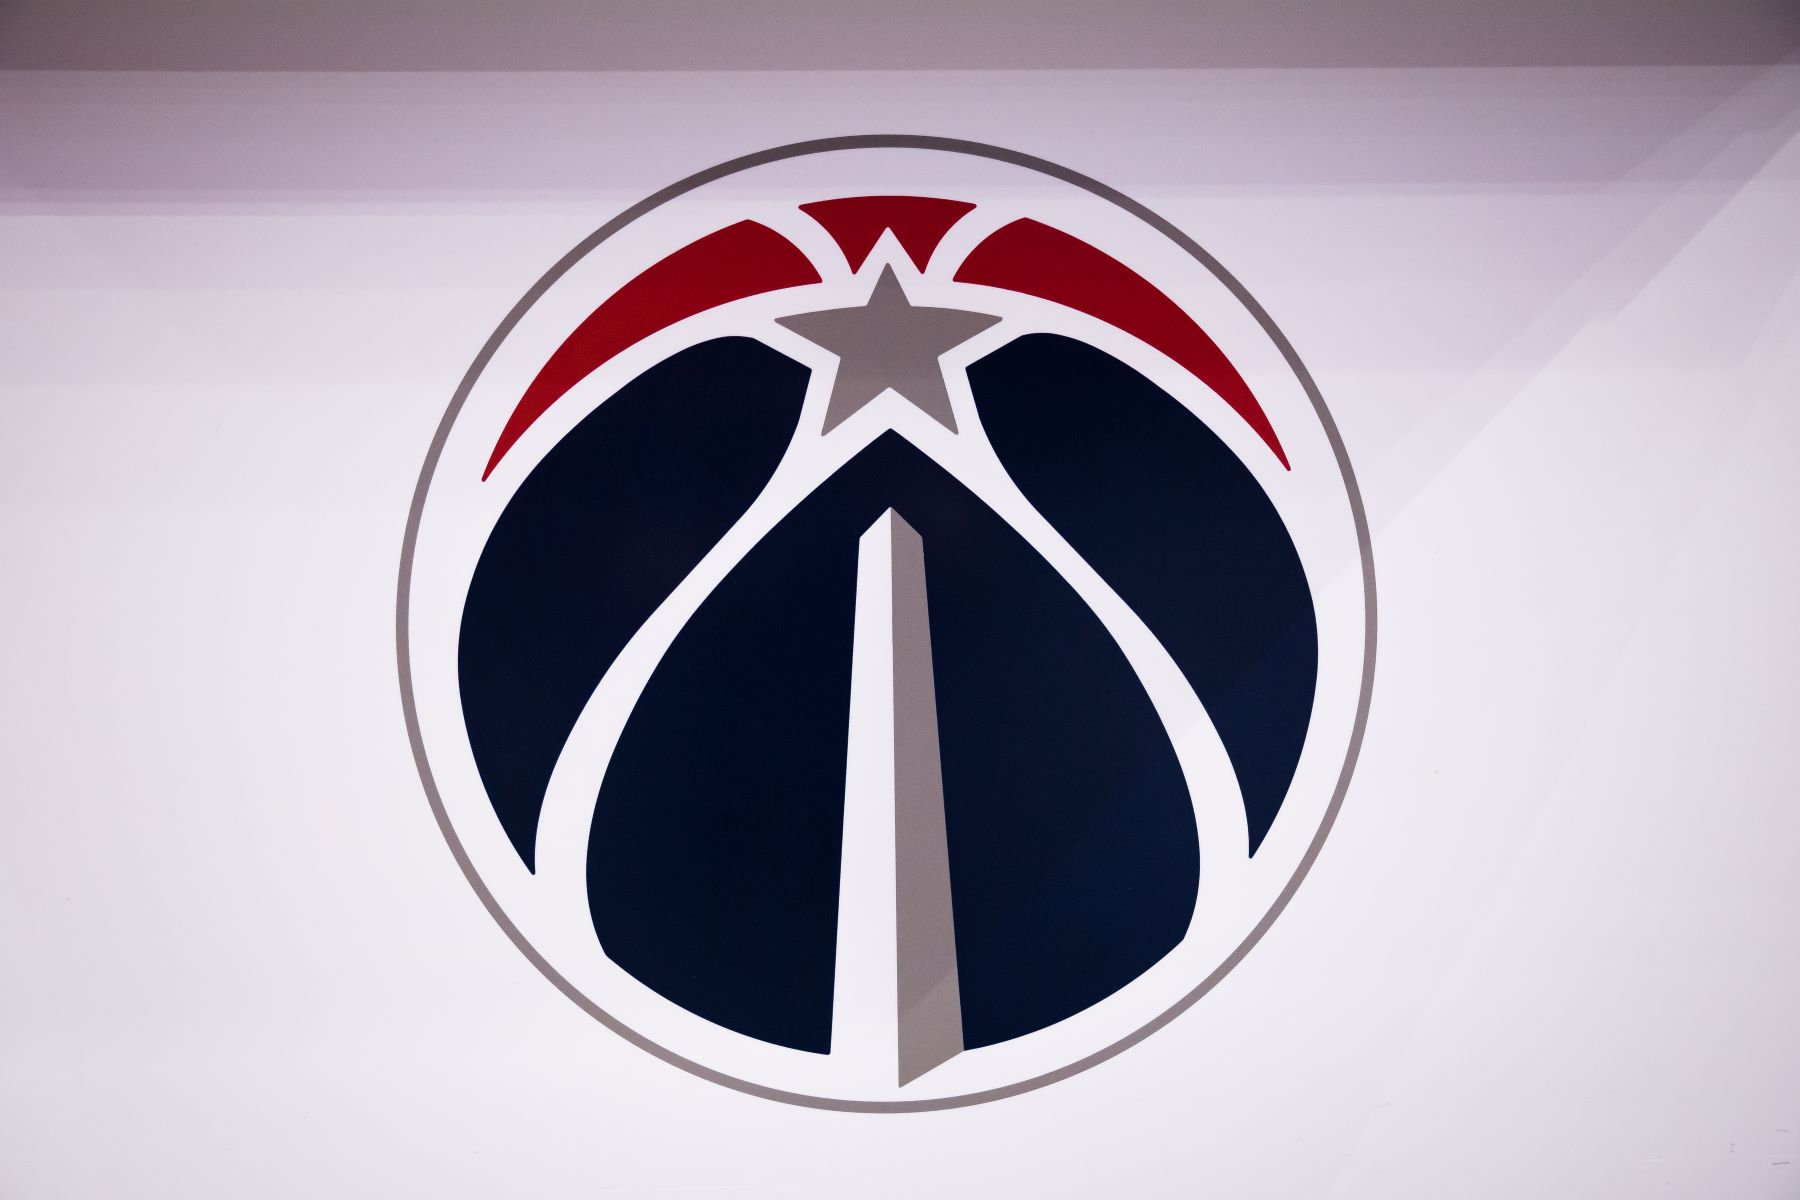 The Washington Wizards logo seen during a game against the Boston Celtics at Capital One Arena in Washington D.C.